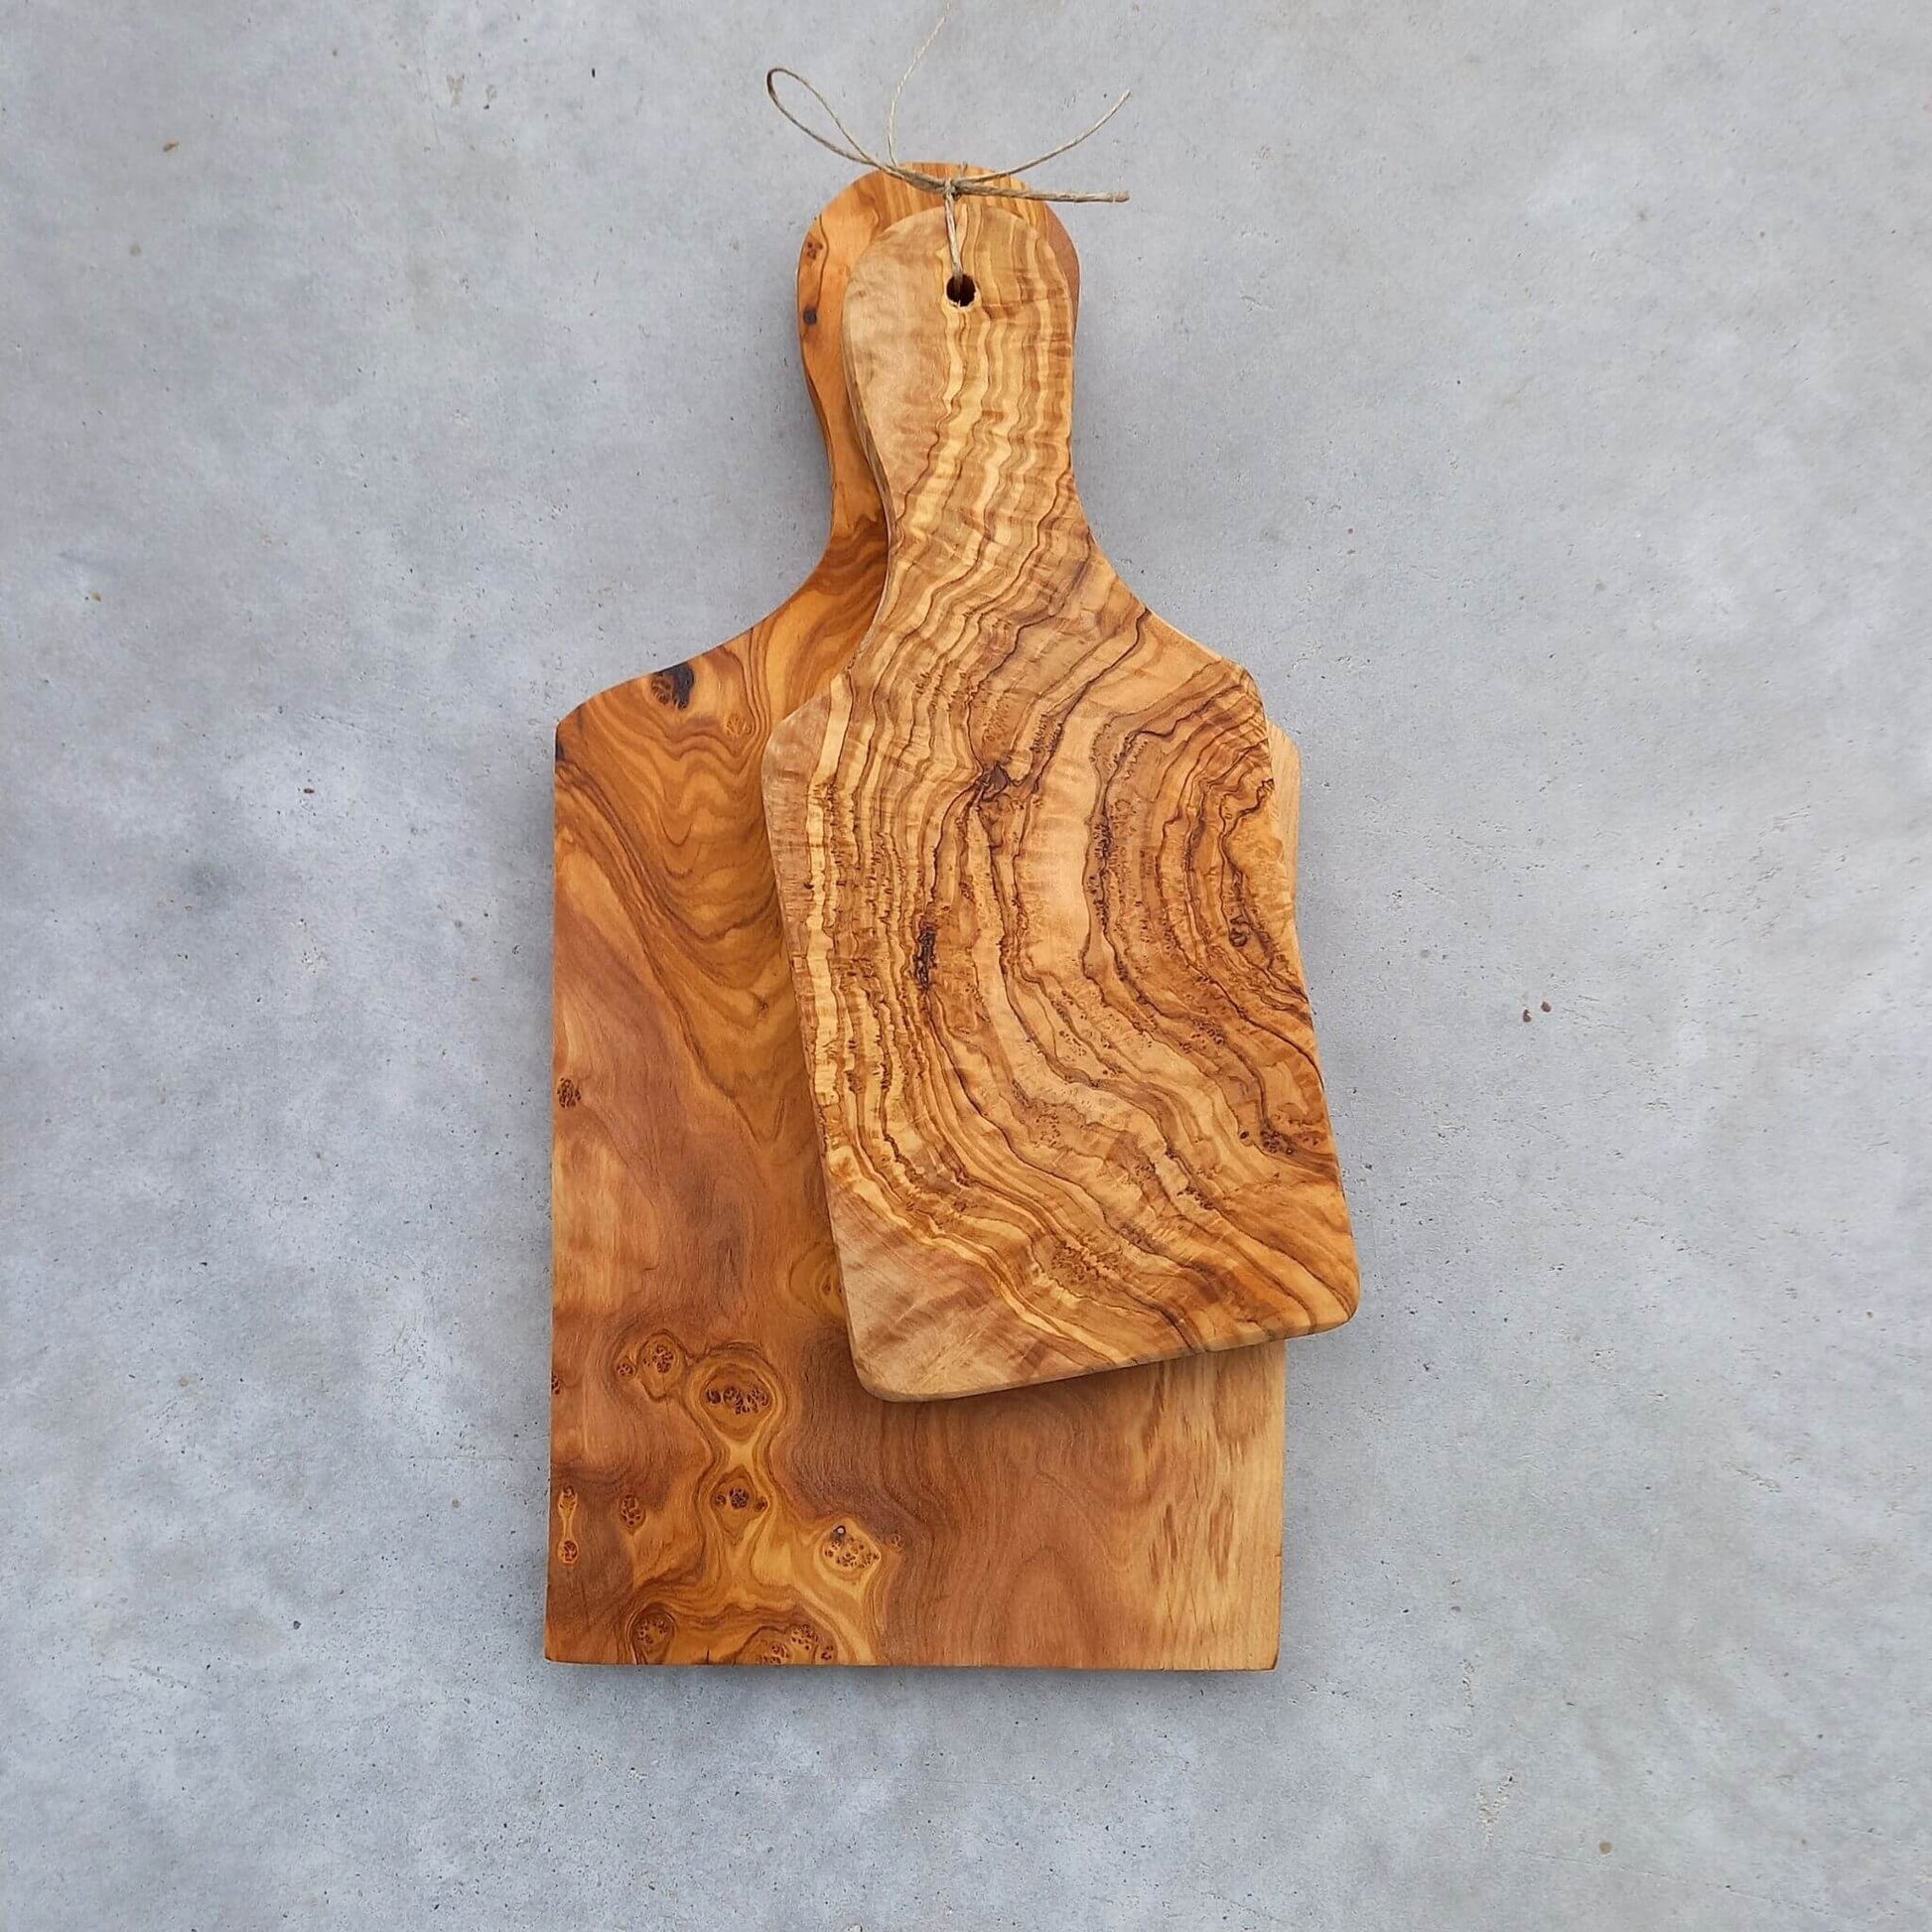 Olive wood - Set of 2 Olive Wood cutting boards with handle - Unik by Nature